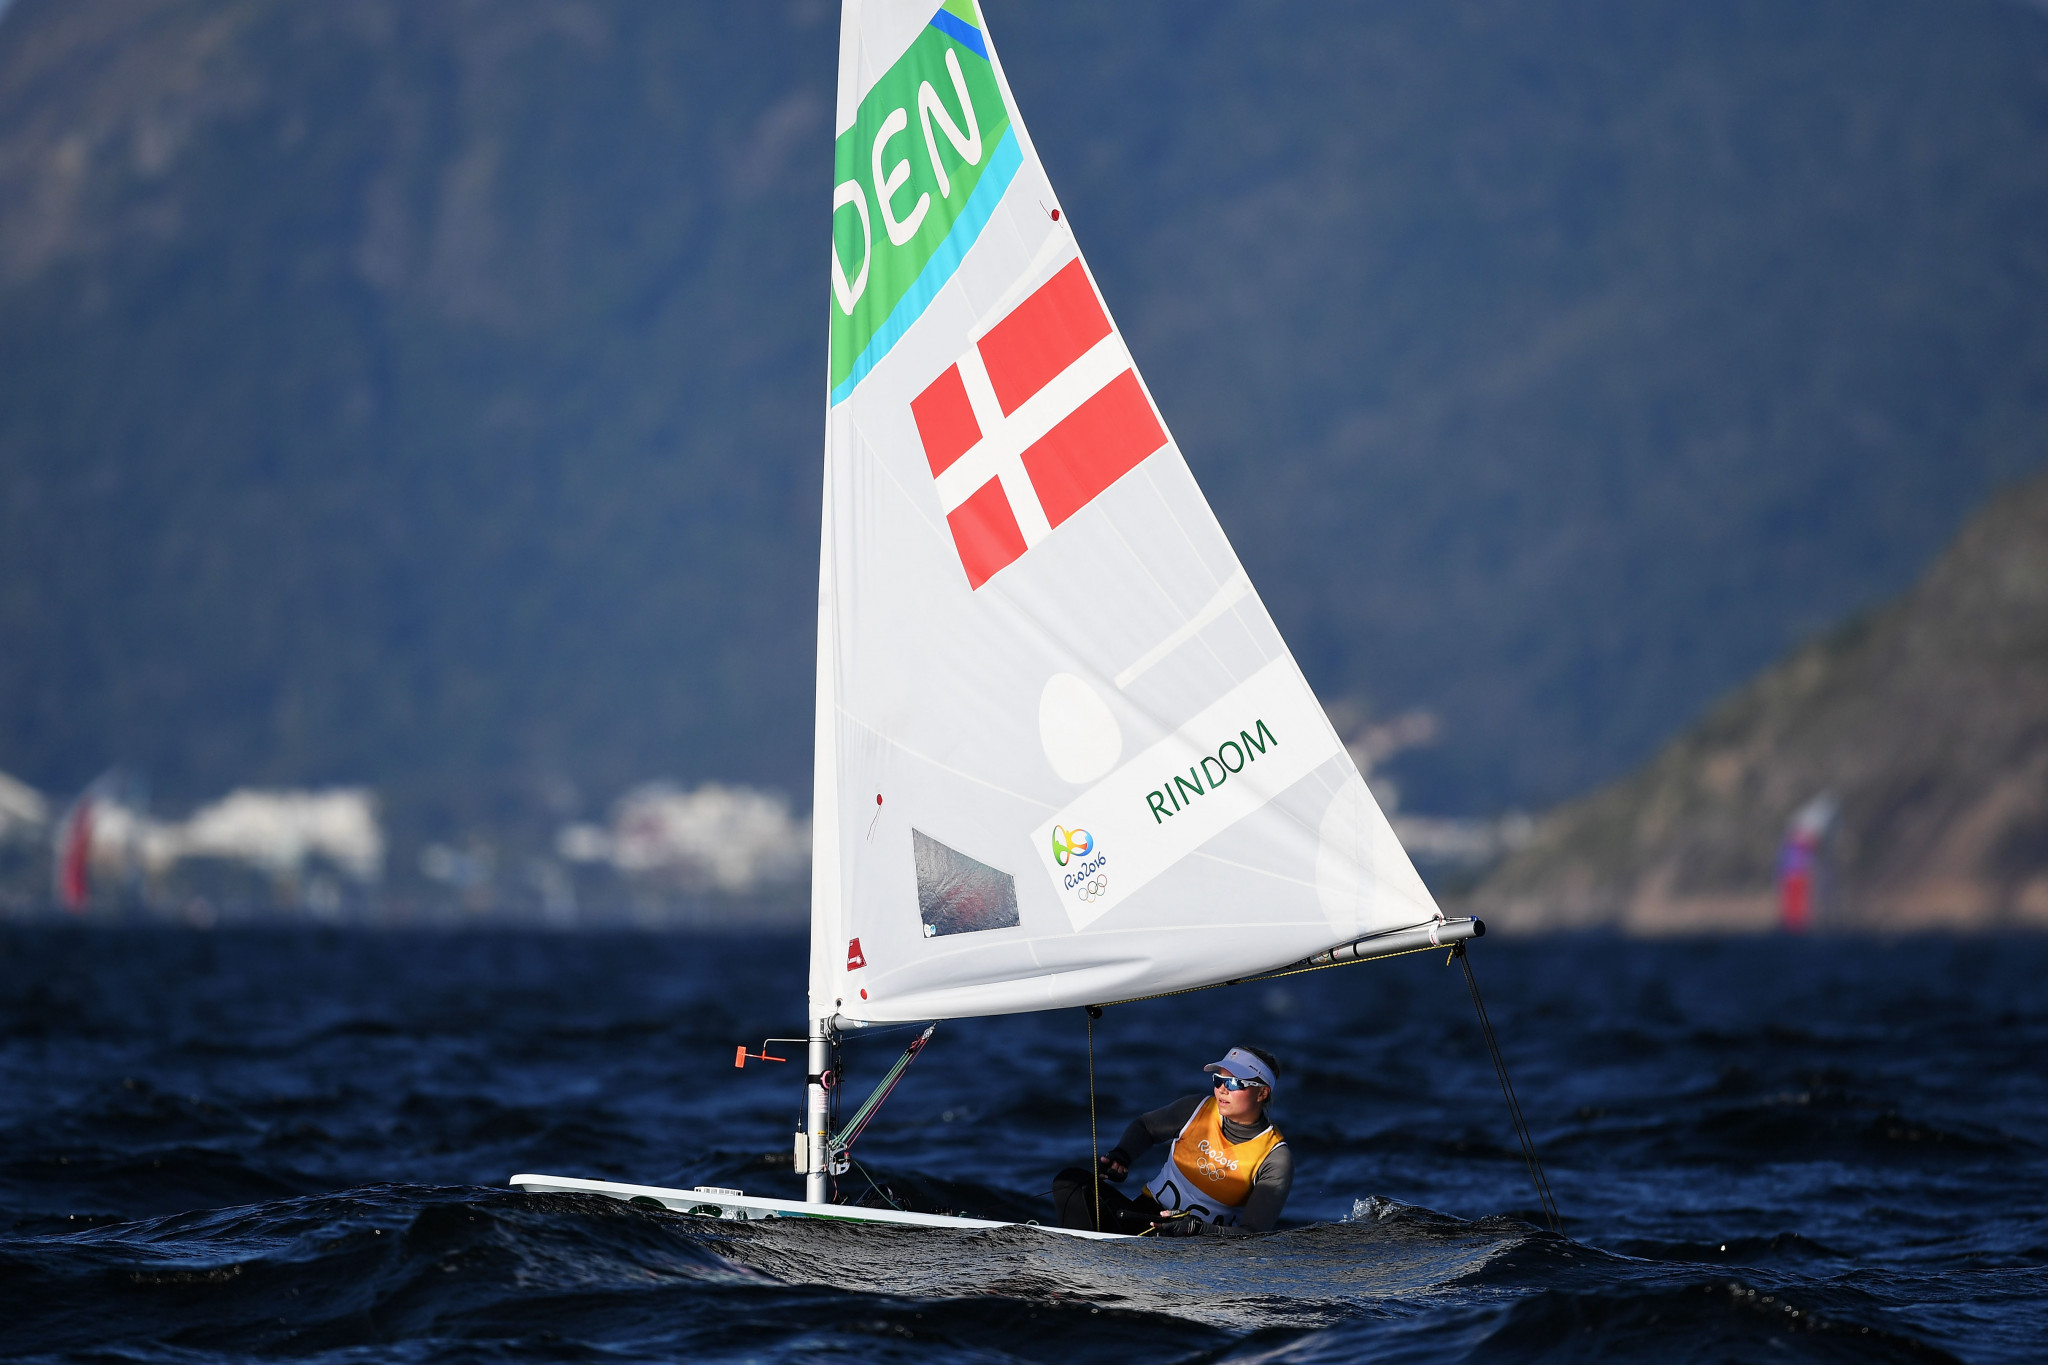 Olympic bronze medallist Anne-Marie Rindom won the laser radial event ©Getty Images